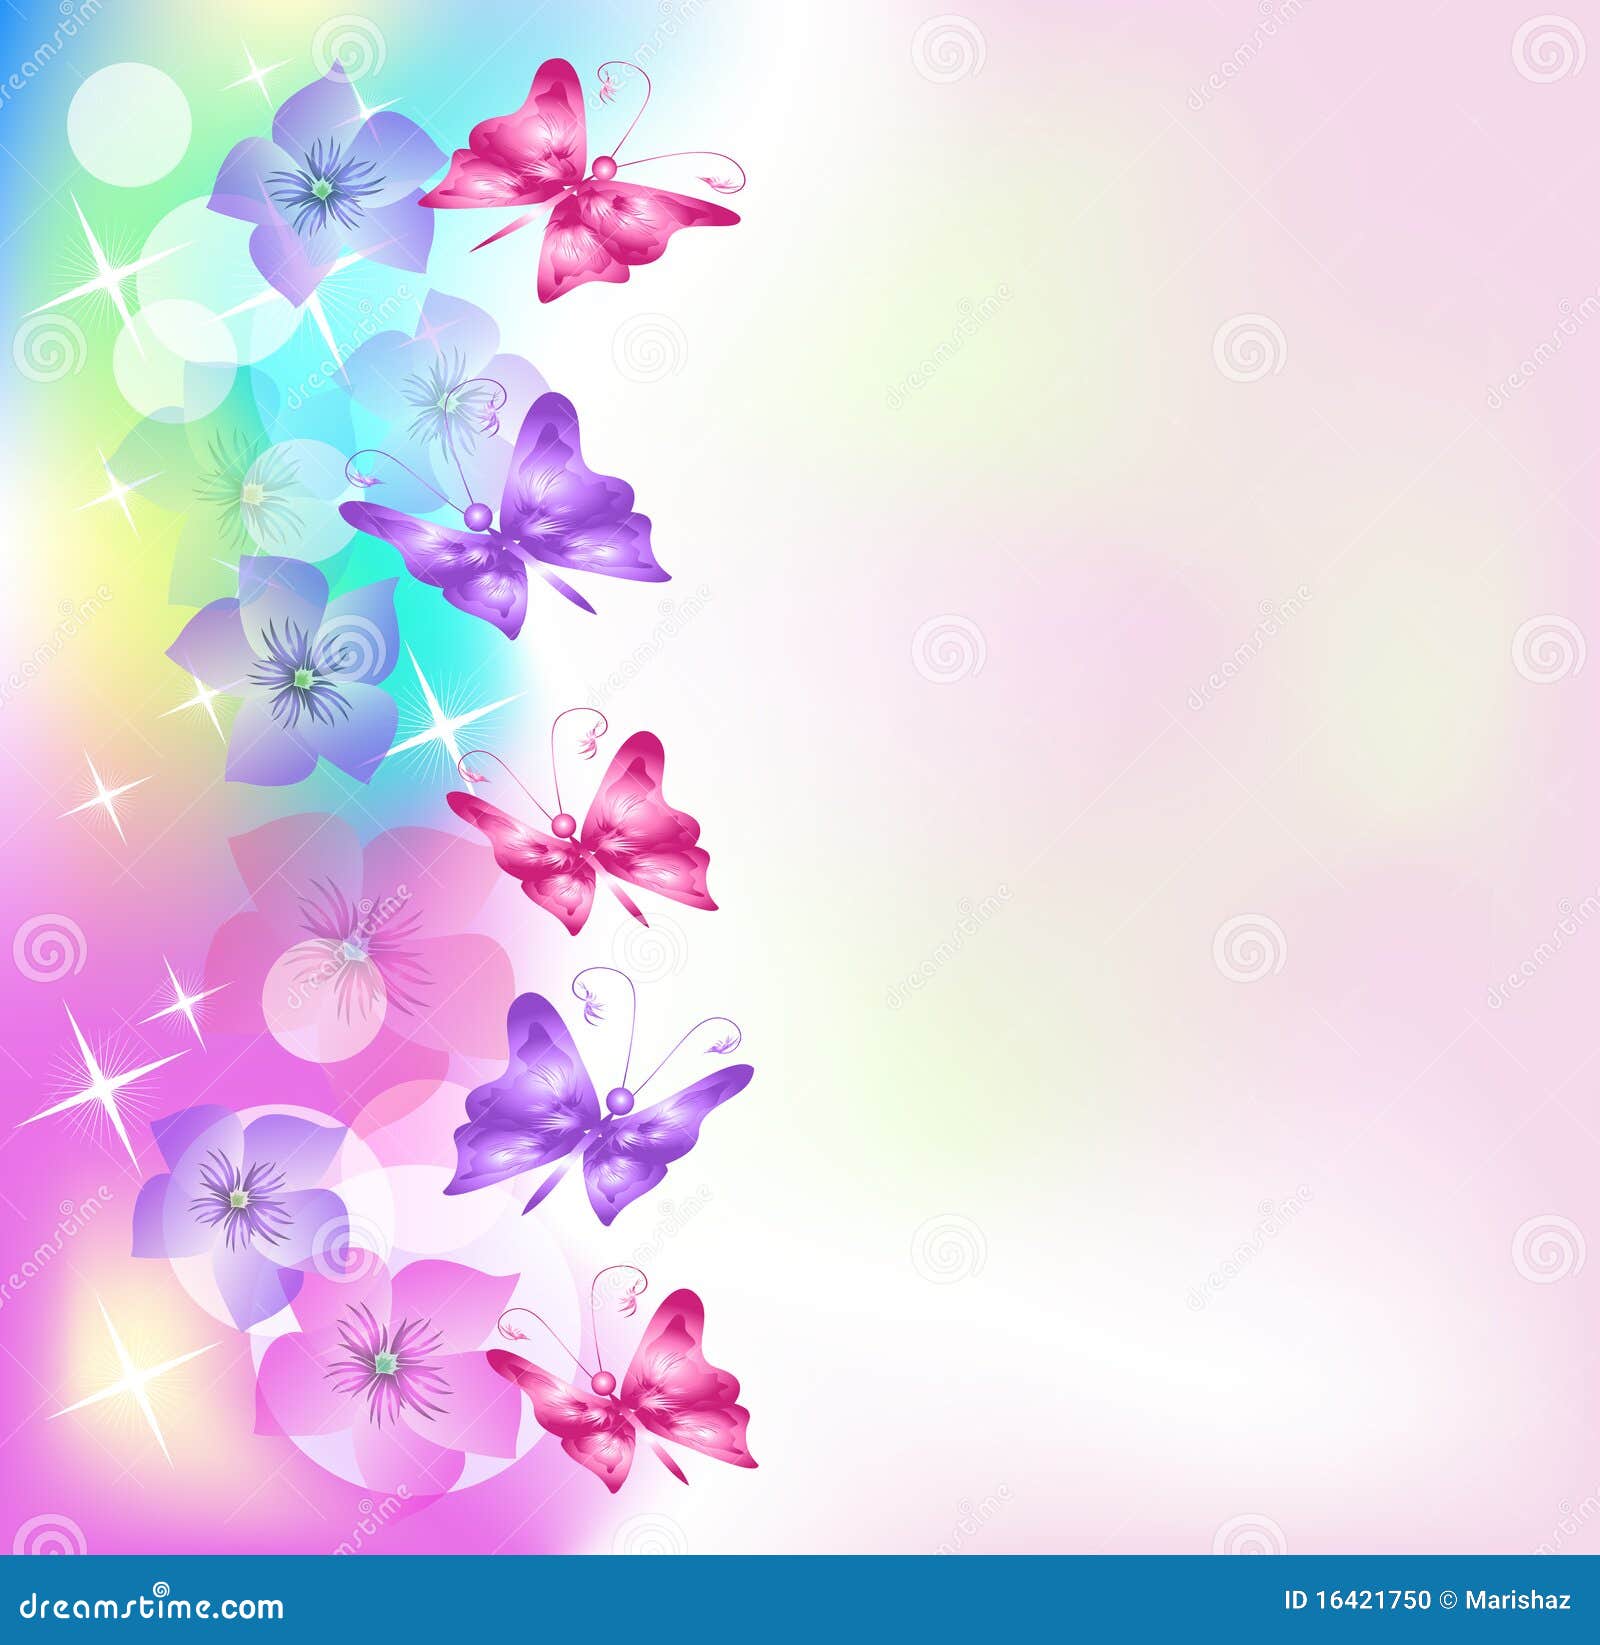 Floral Background With Butterfly Stock Vector - Illustration of foliage